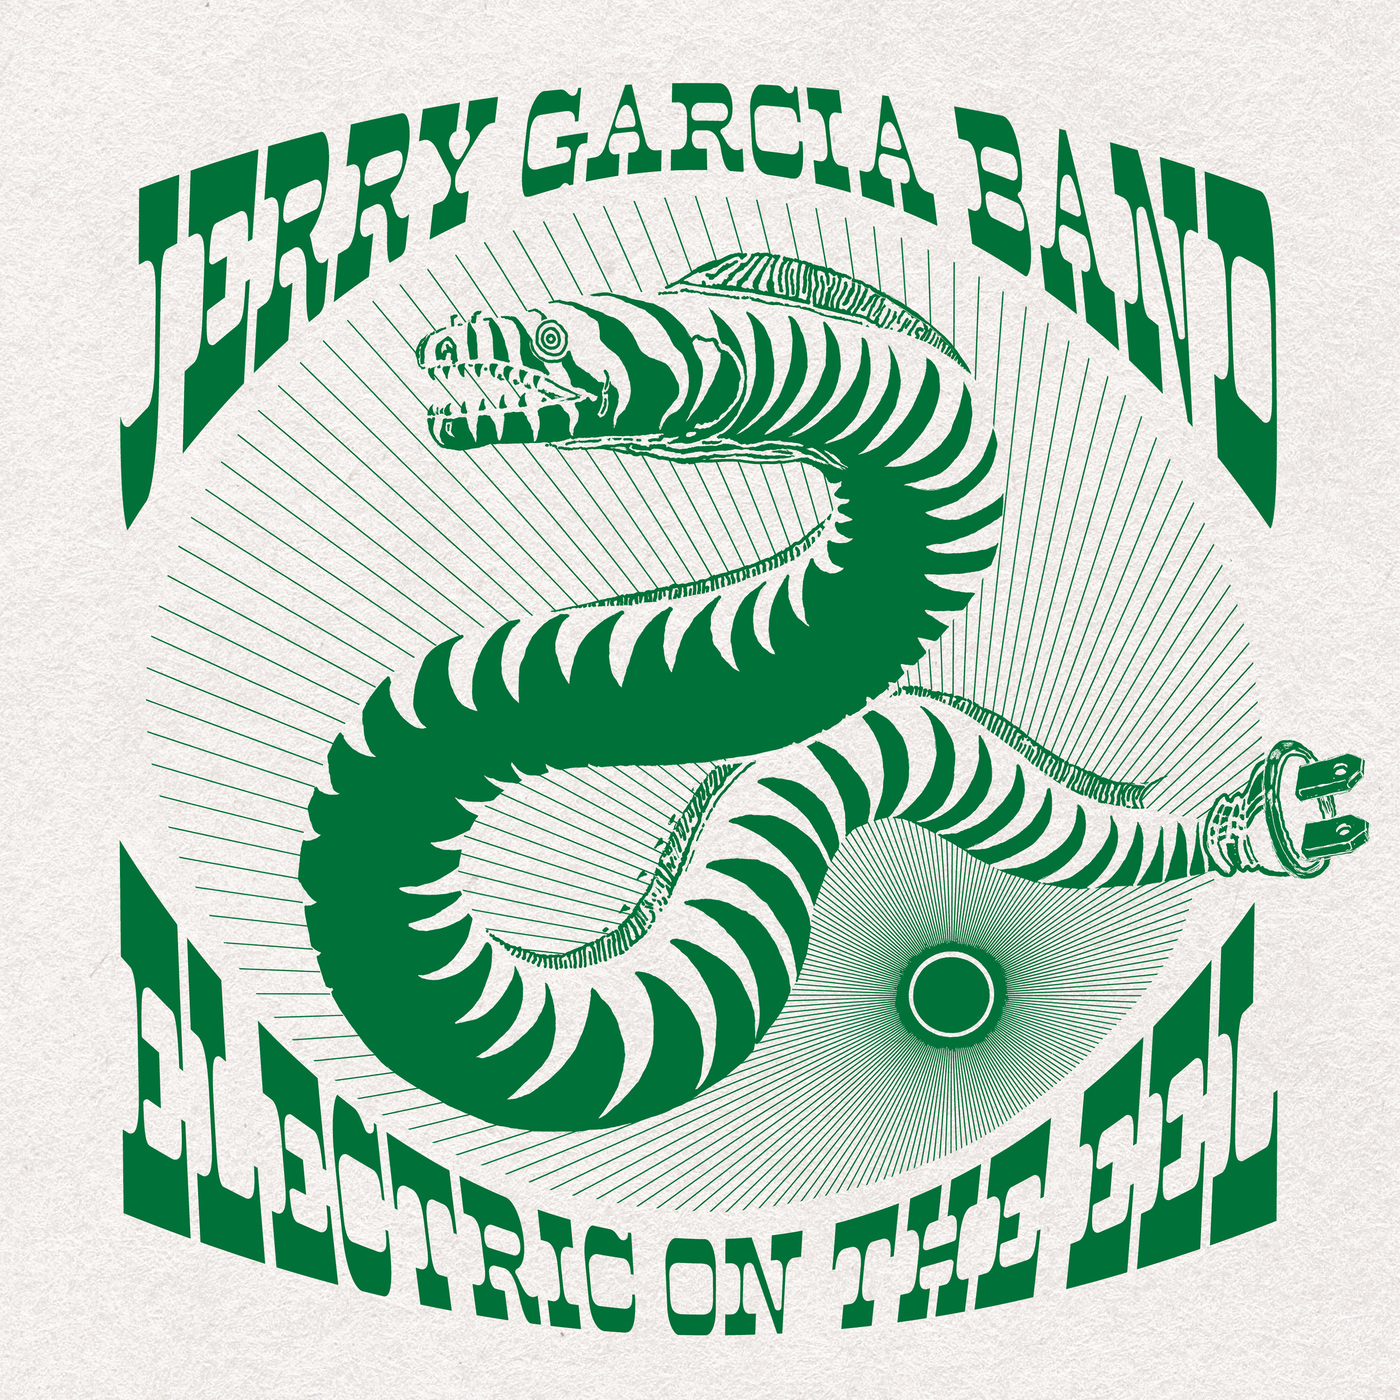 Jerry Garcia Band - Electric on the Eel (2019) [FLAC 24bit/88,2kHz]